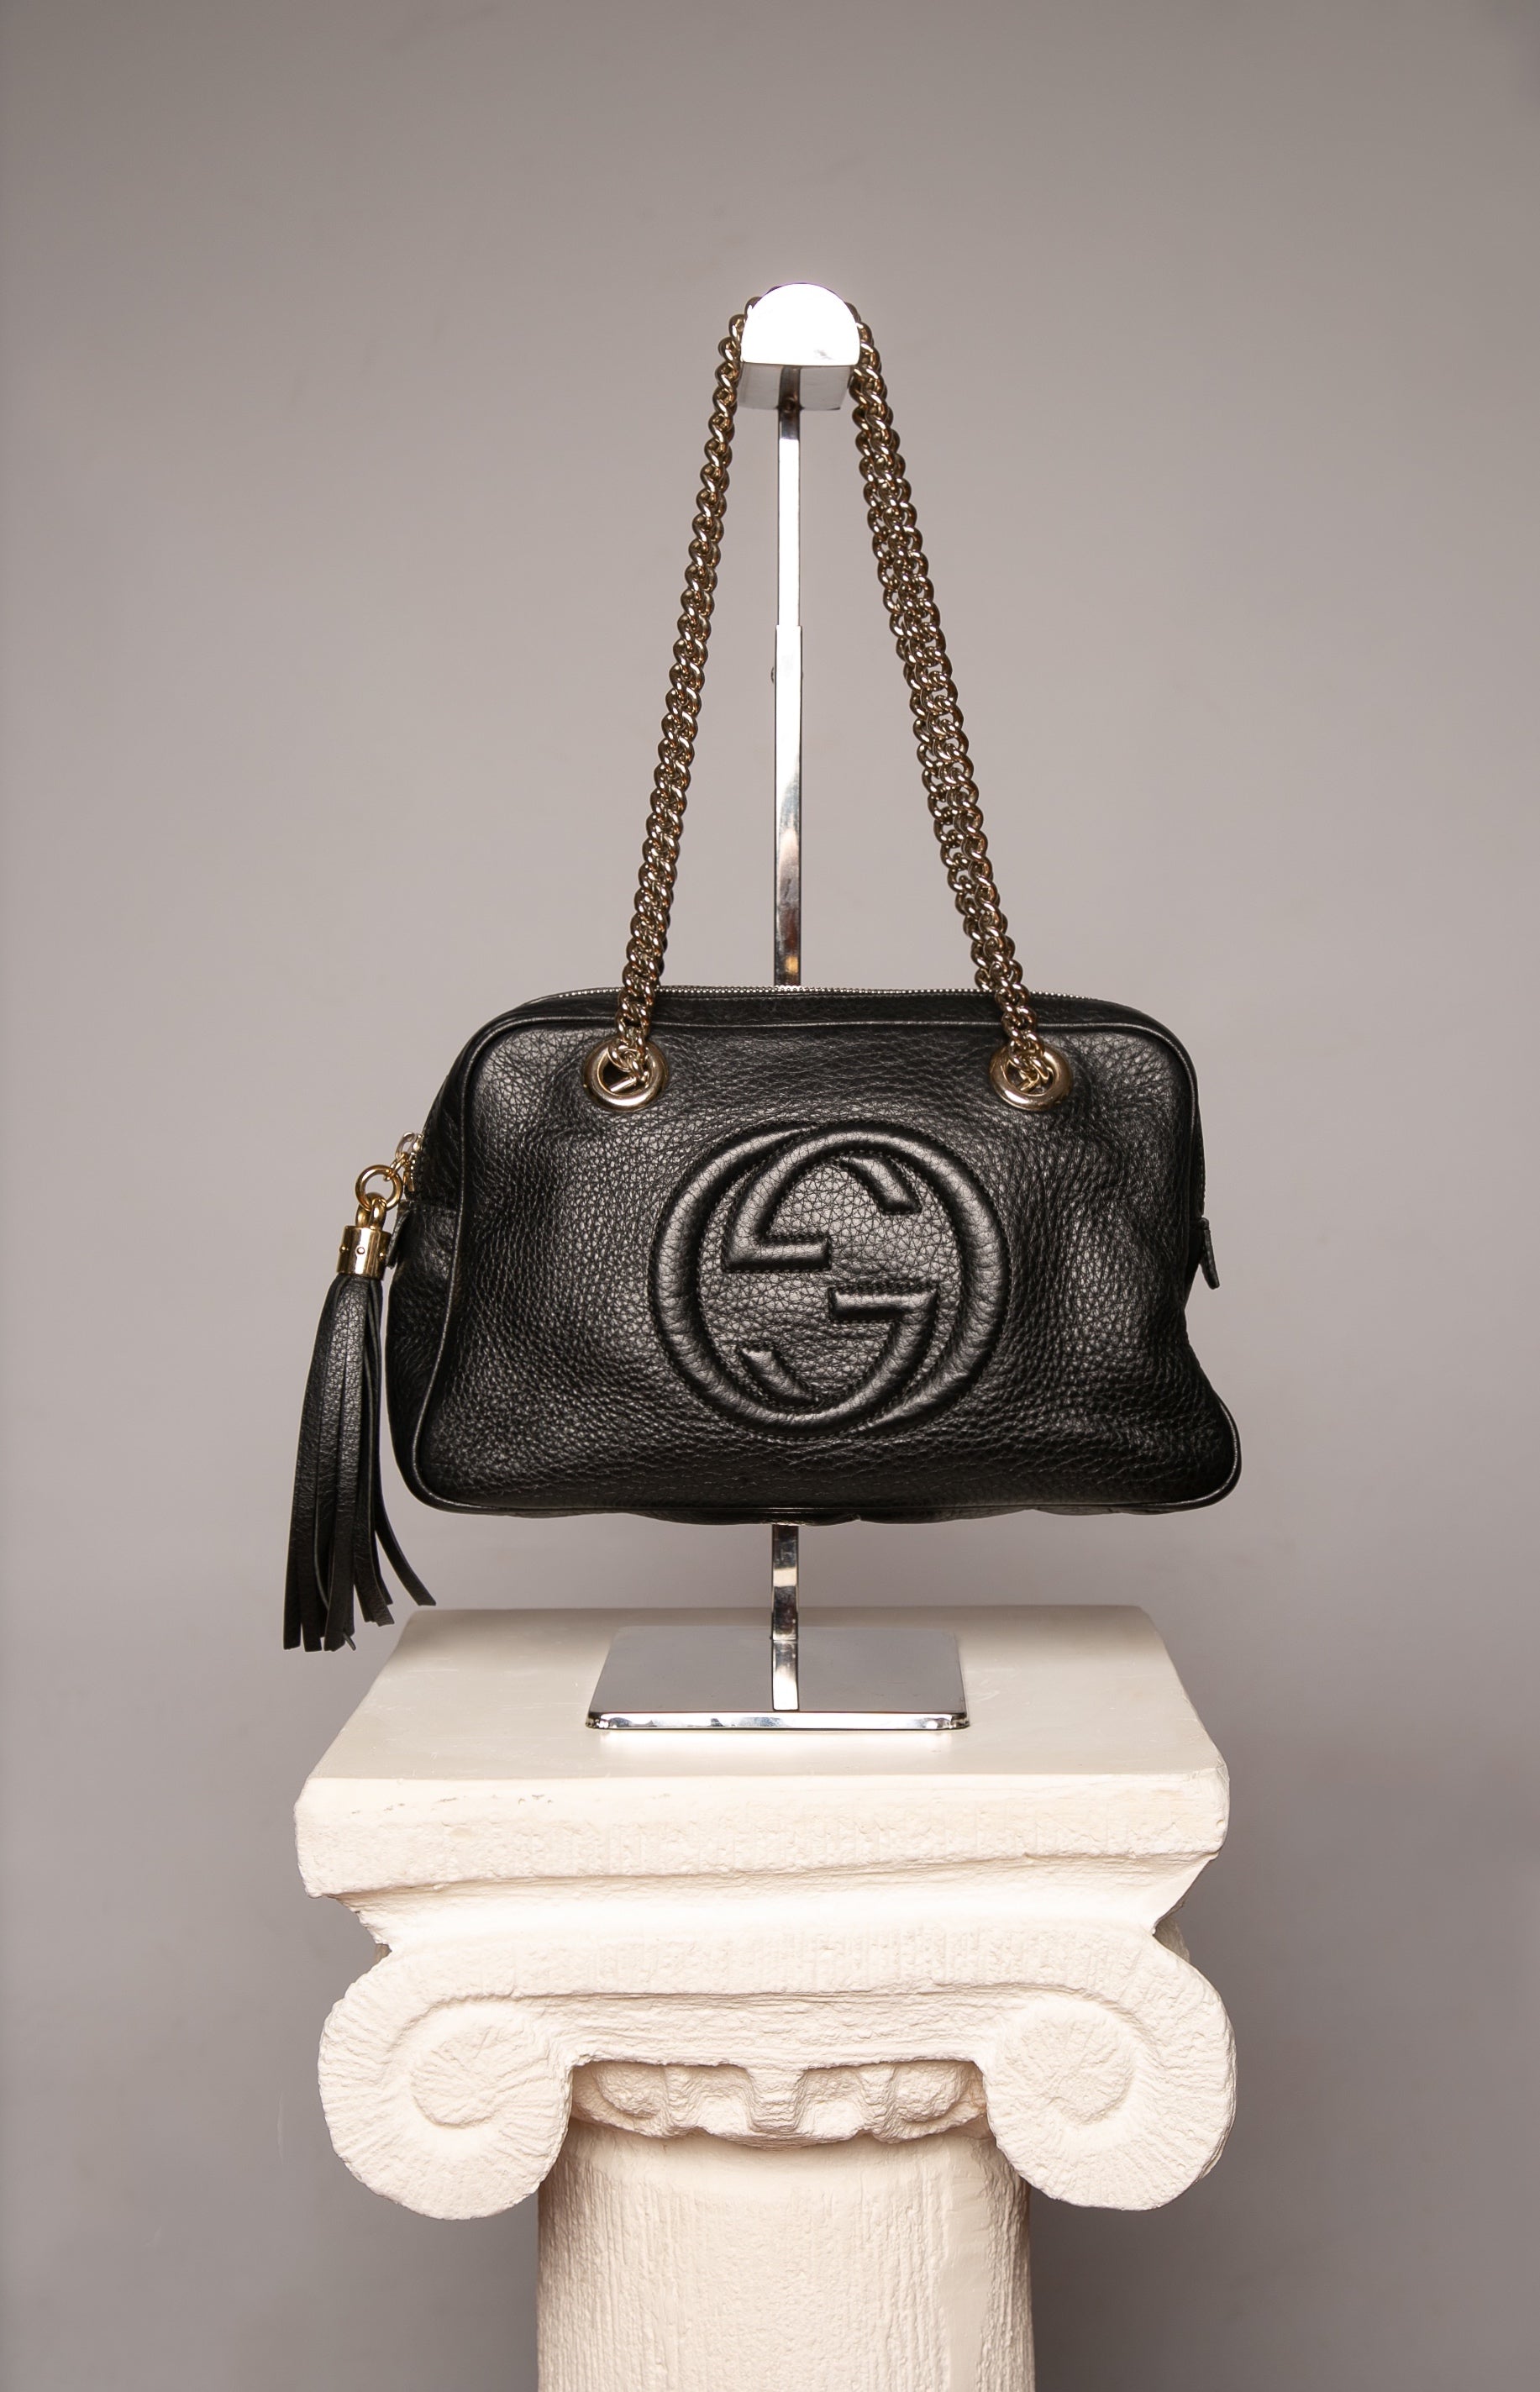 chanel-double-quilted-bag - Bal Harbour Shops